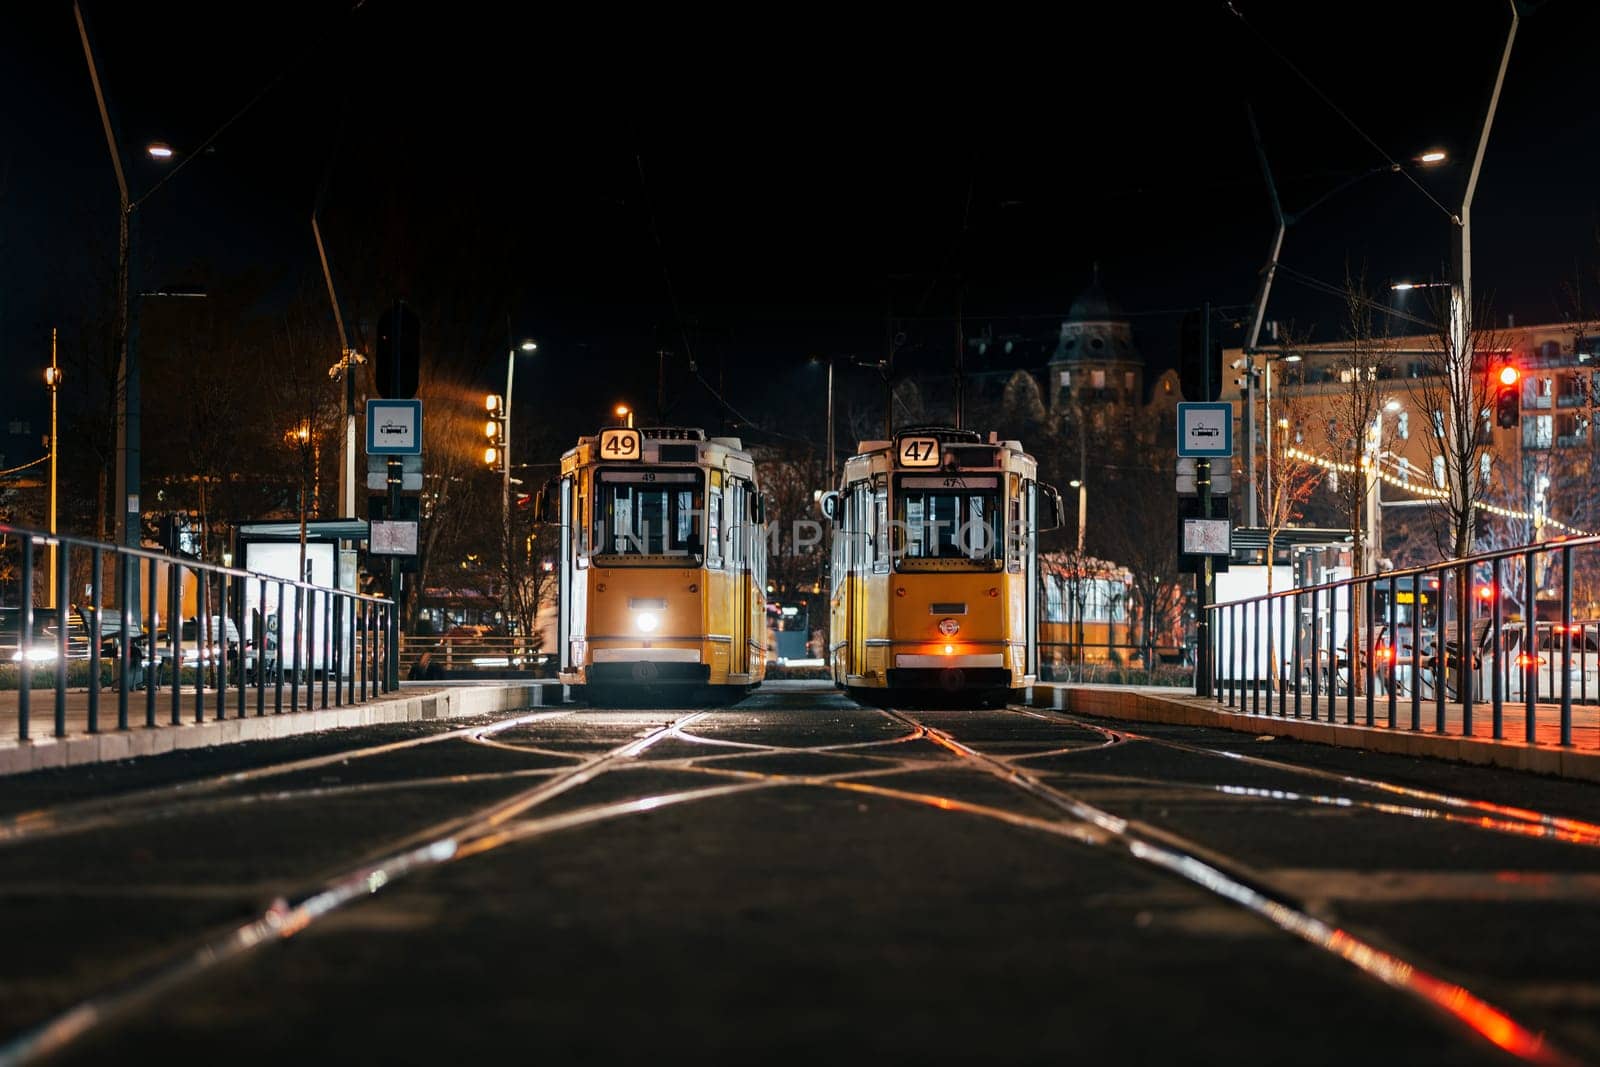 Resting trams locate on rails in city street at night time by apavlin